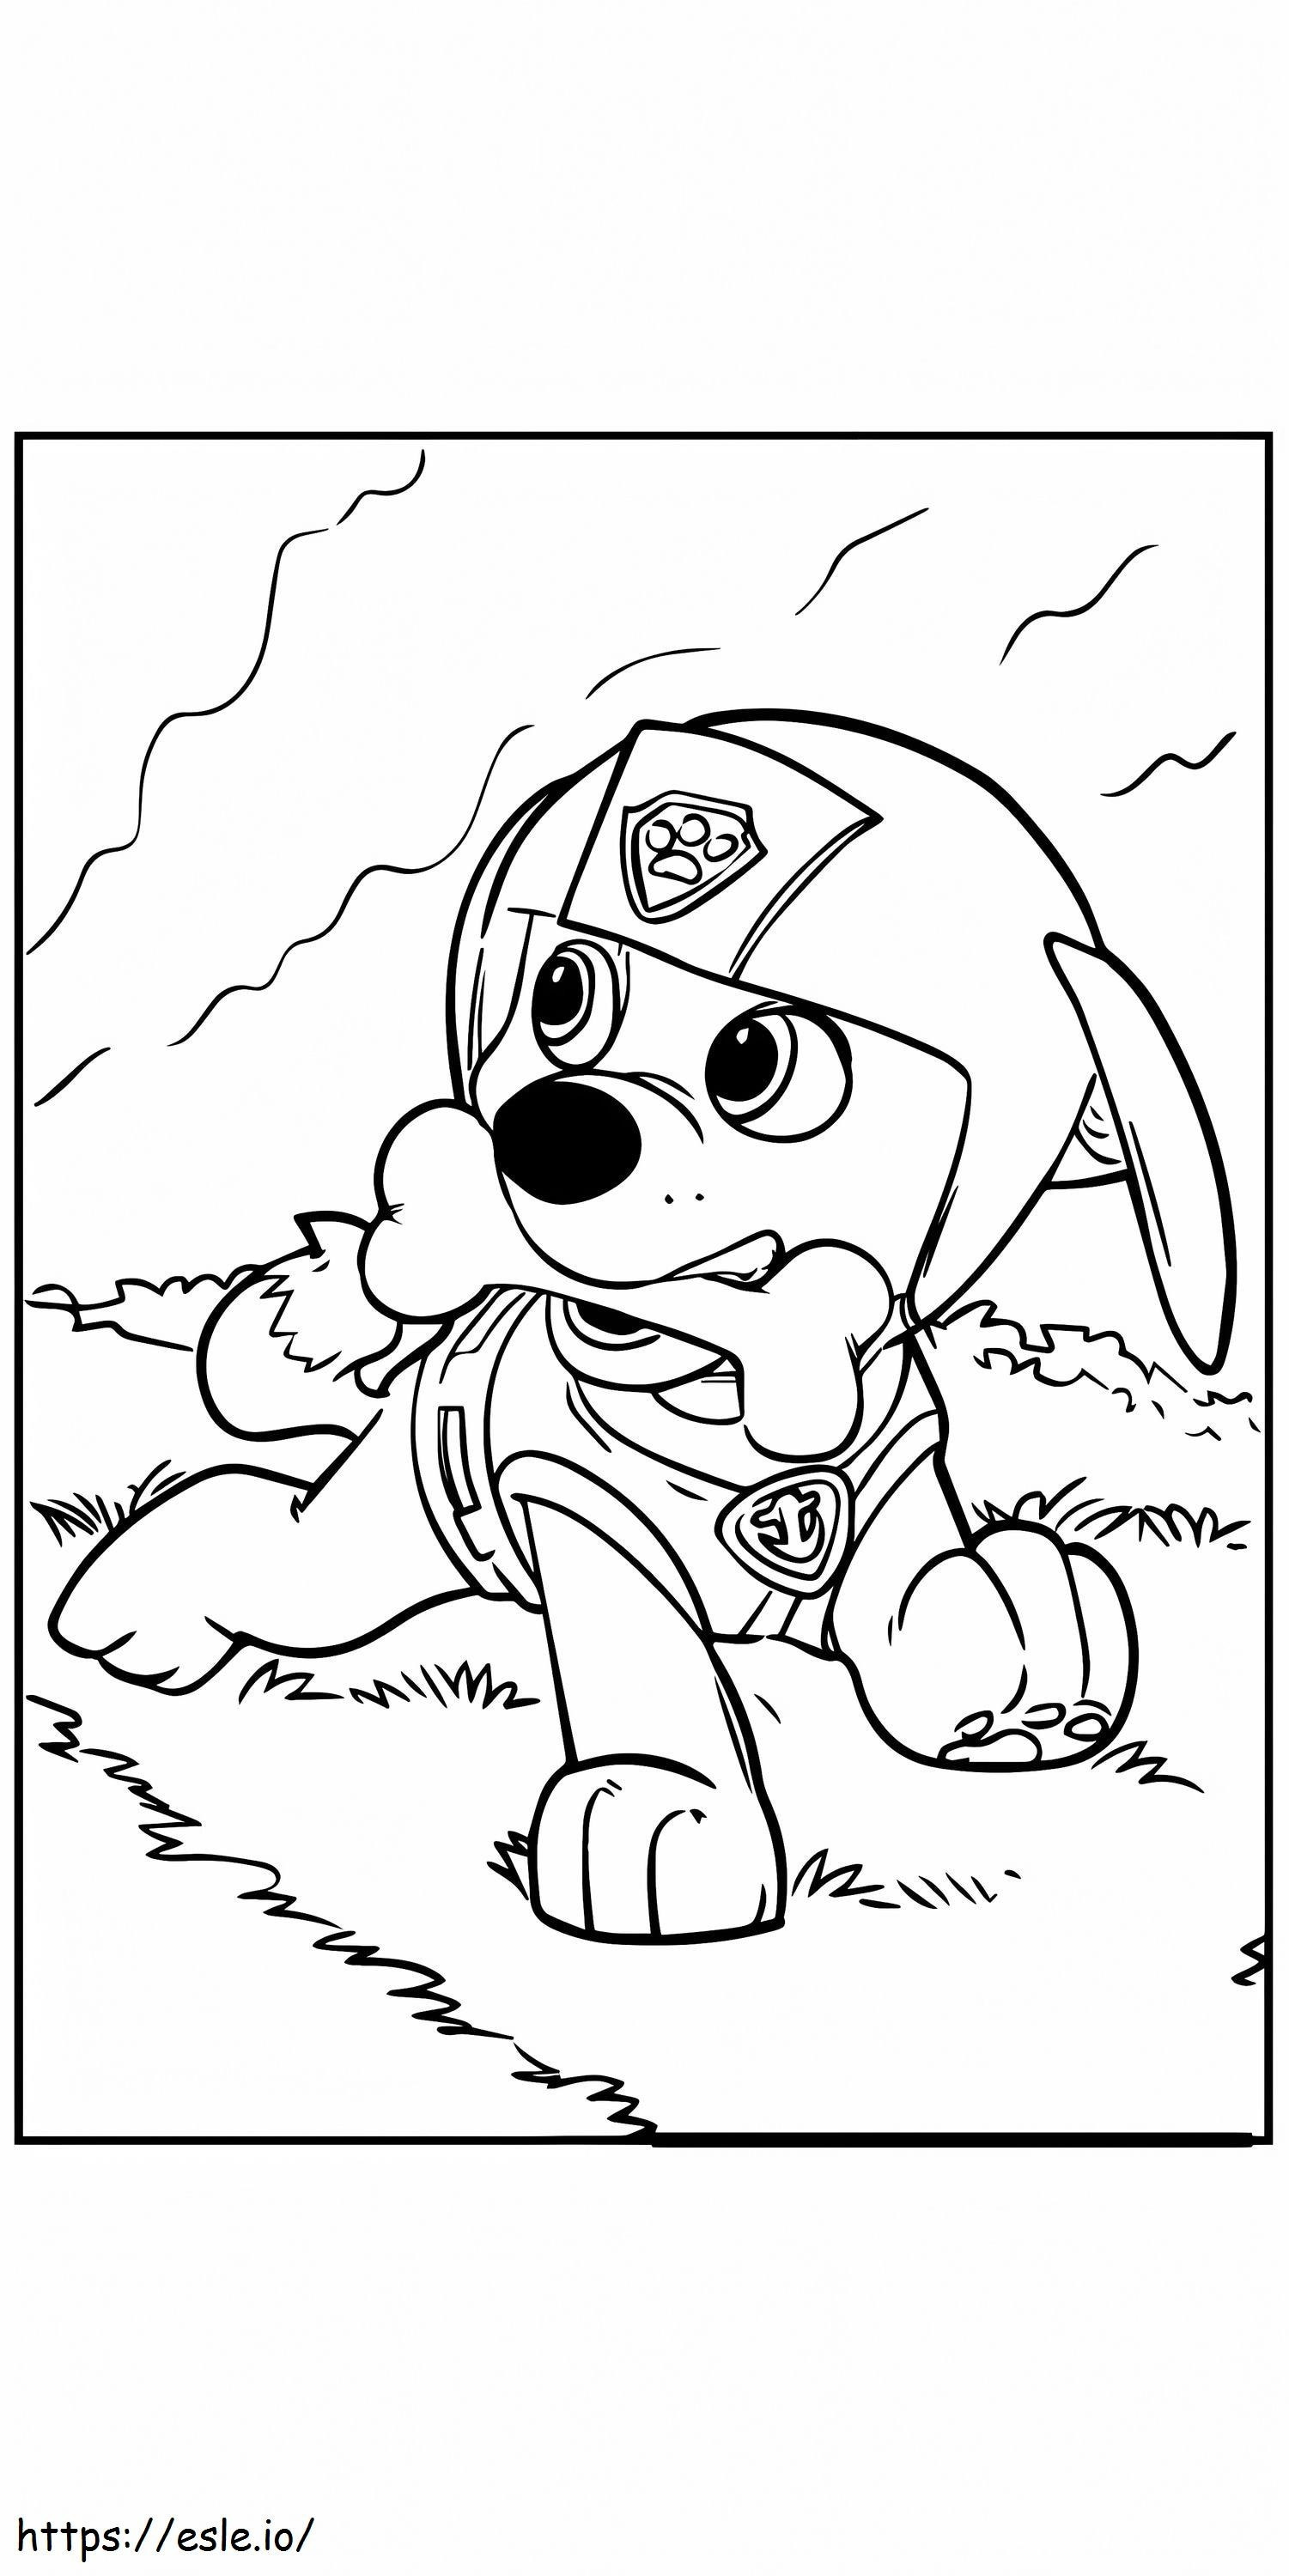 Paw Patrol Mighty Skye coloring page